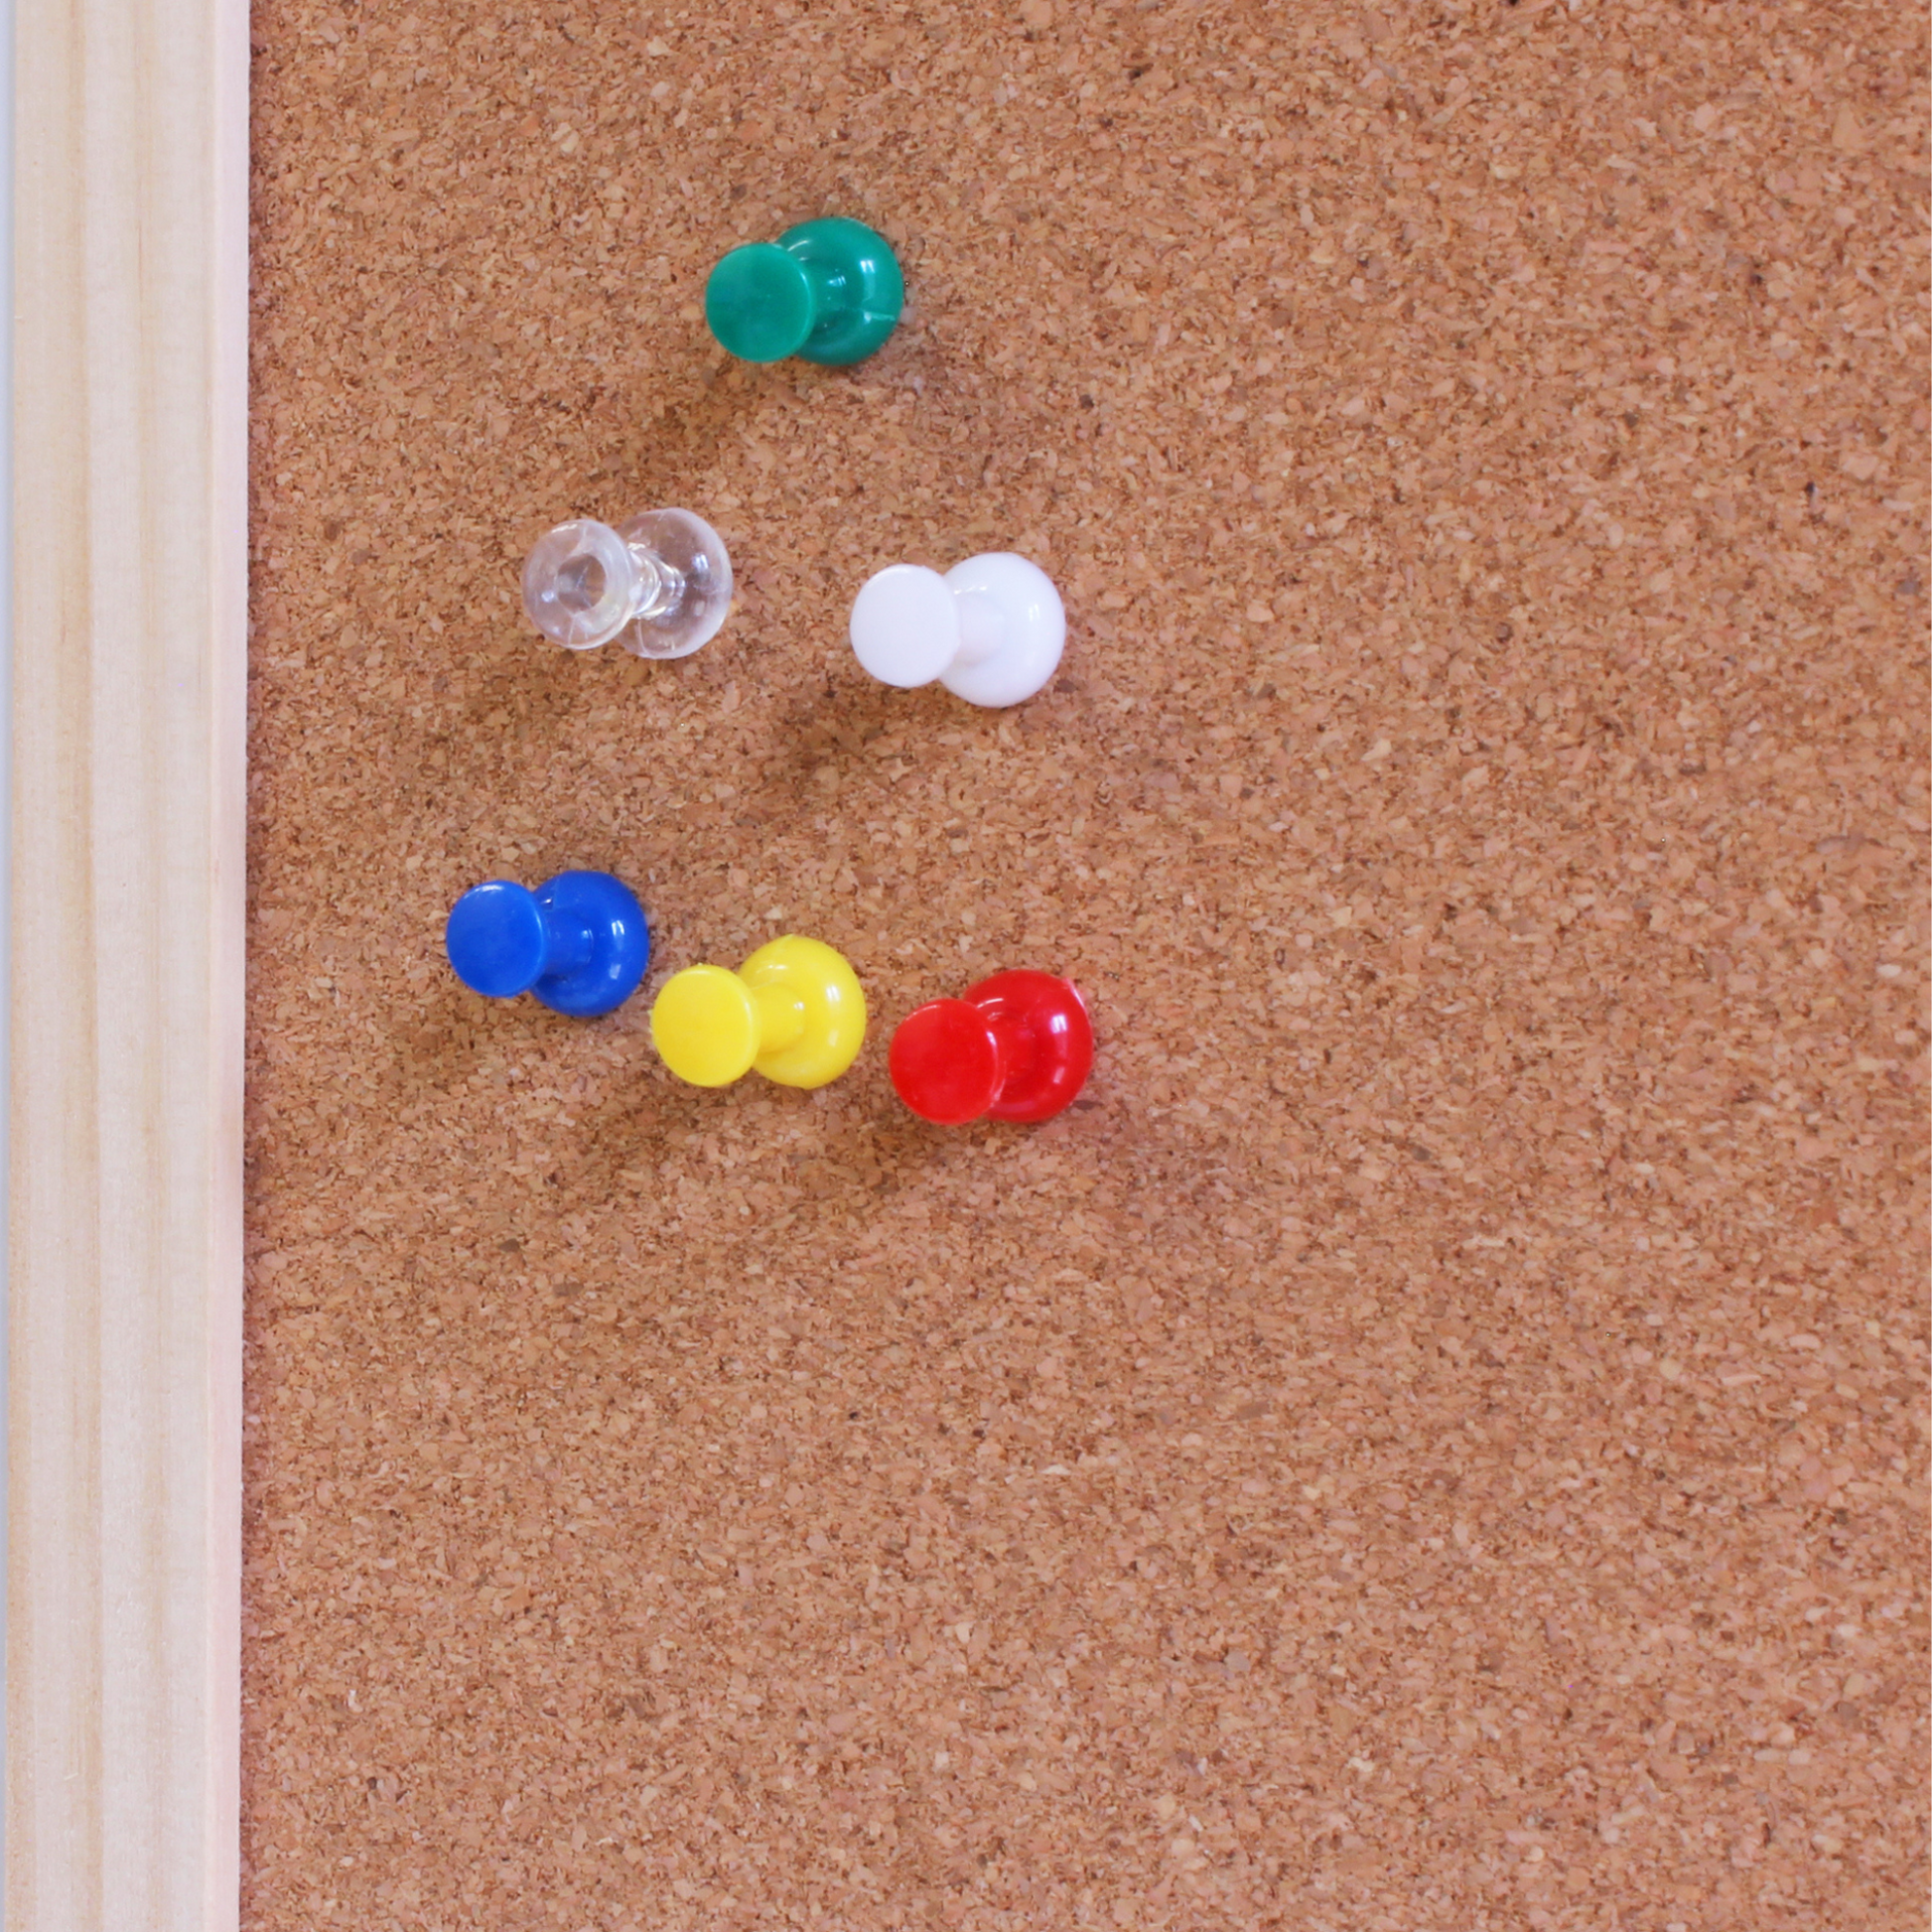 Corkboard with colorful pushpins: red, blue, yellow, green, white, and clear.